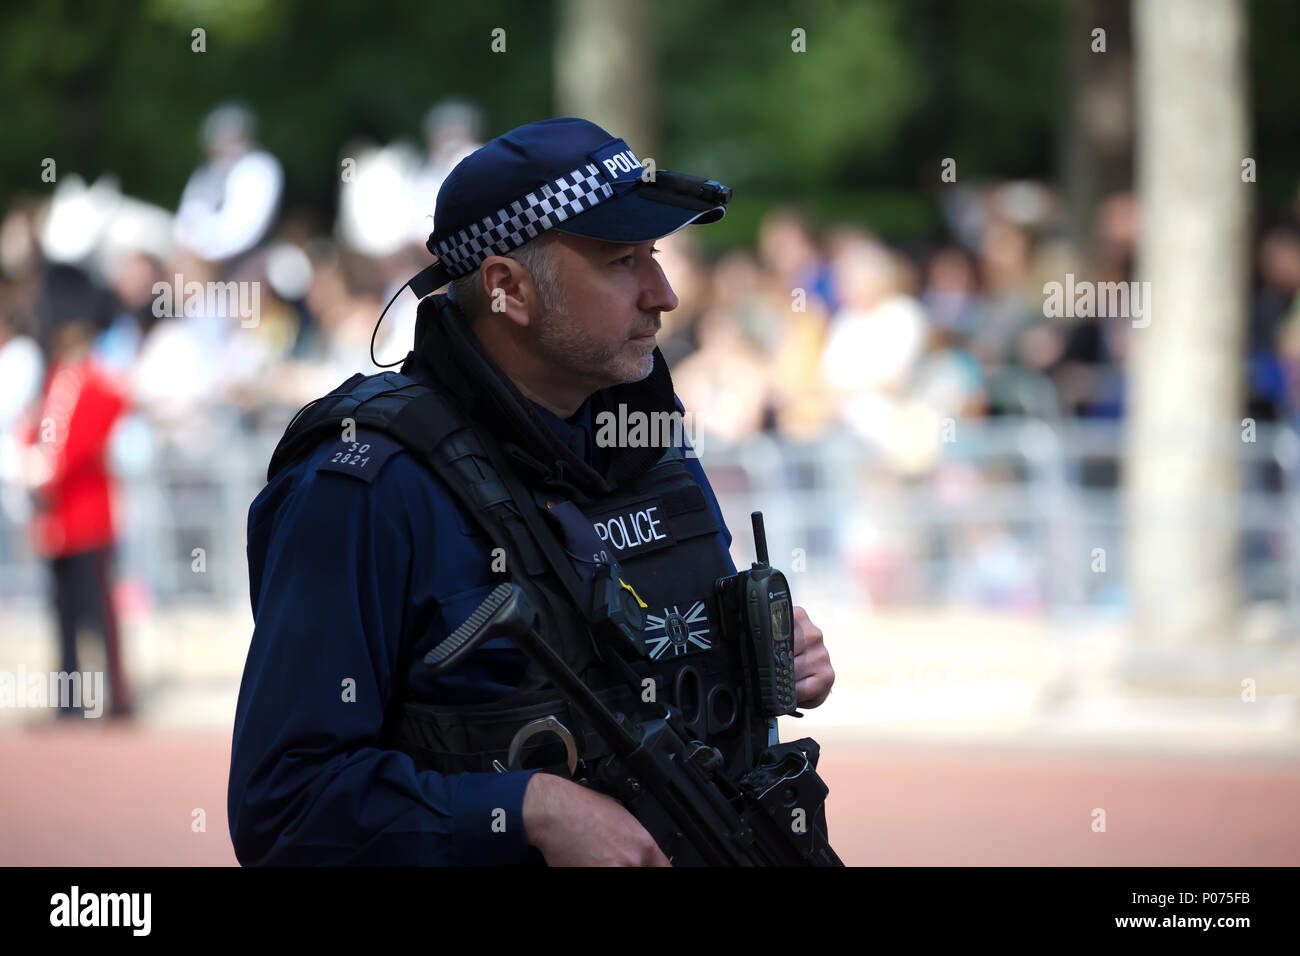 London,UK,9th June 2018,Police officer on duty at The annual Trooping the  Colour which took place in Horseguards Parade to mark the Queens official  Birthday. It was a traditional ceremony full of military